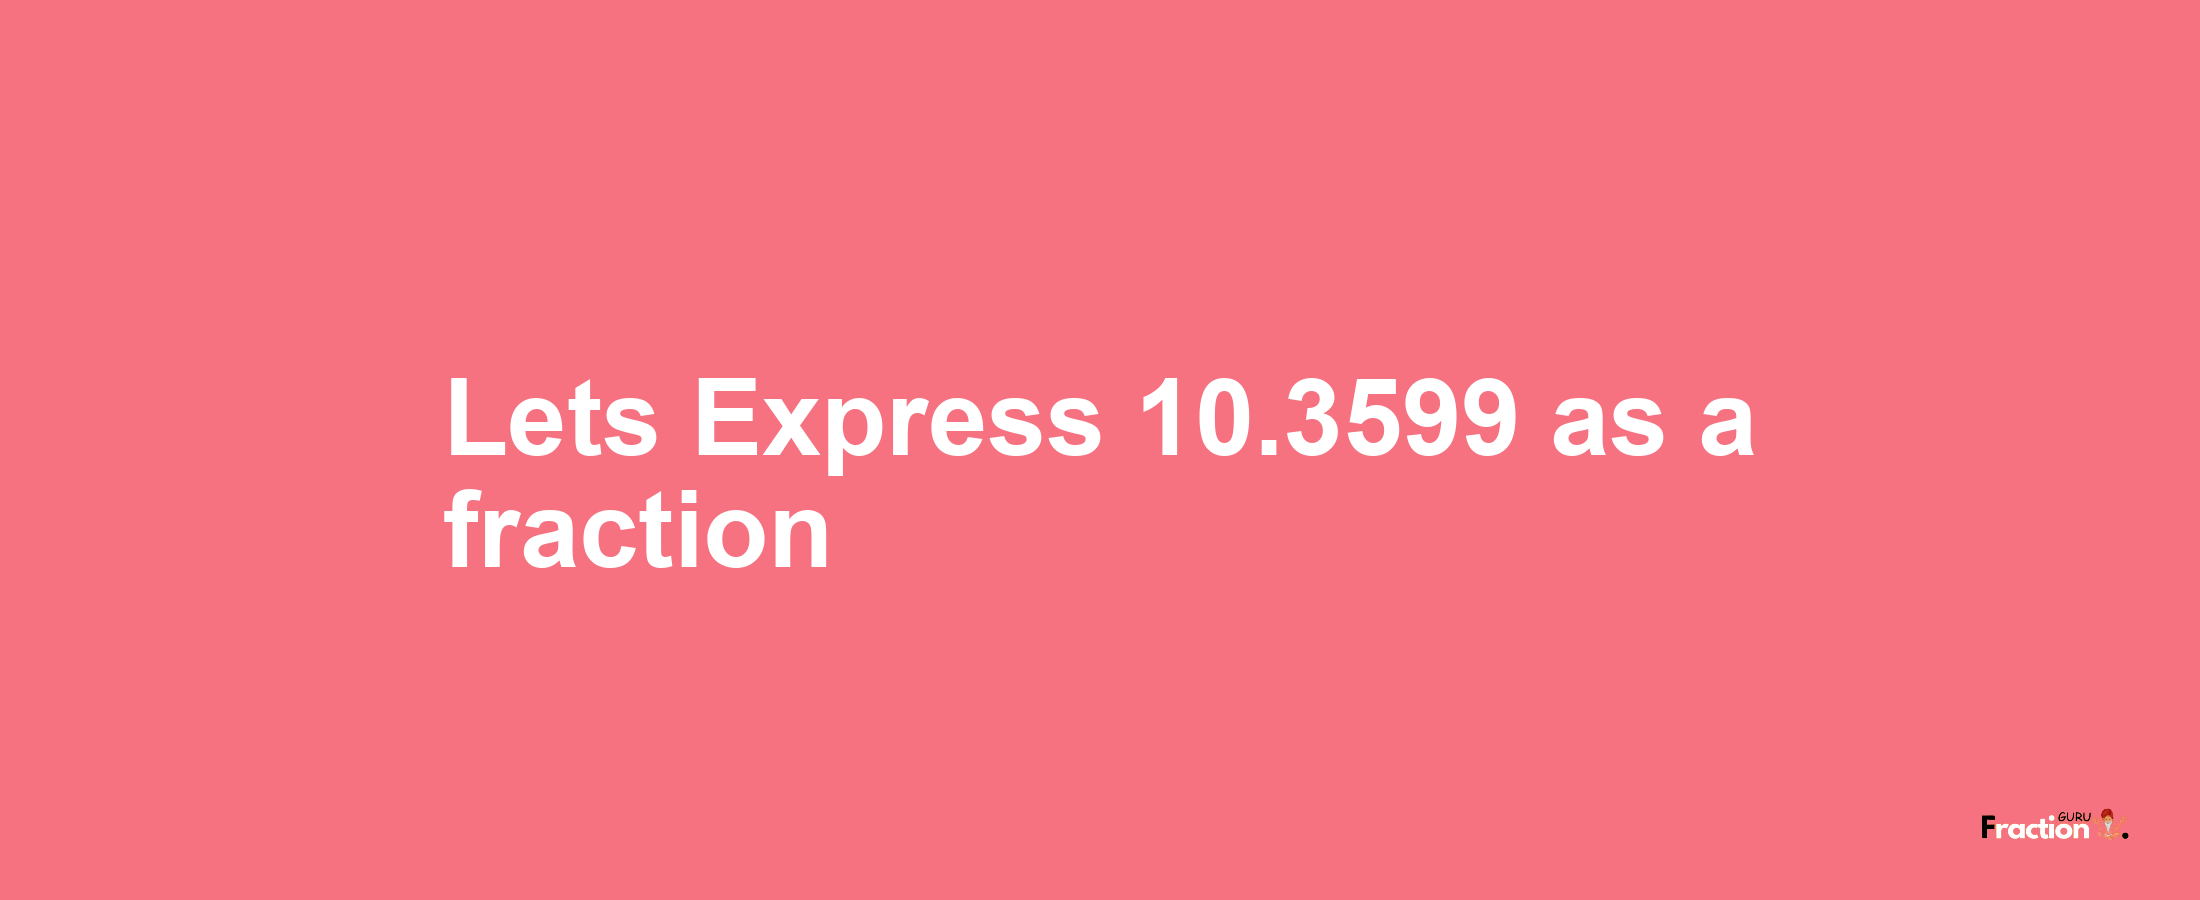 Lets Express 10.3599 as afraction